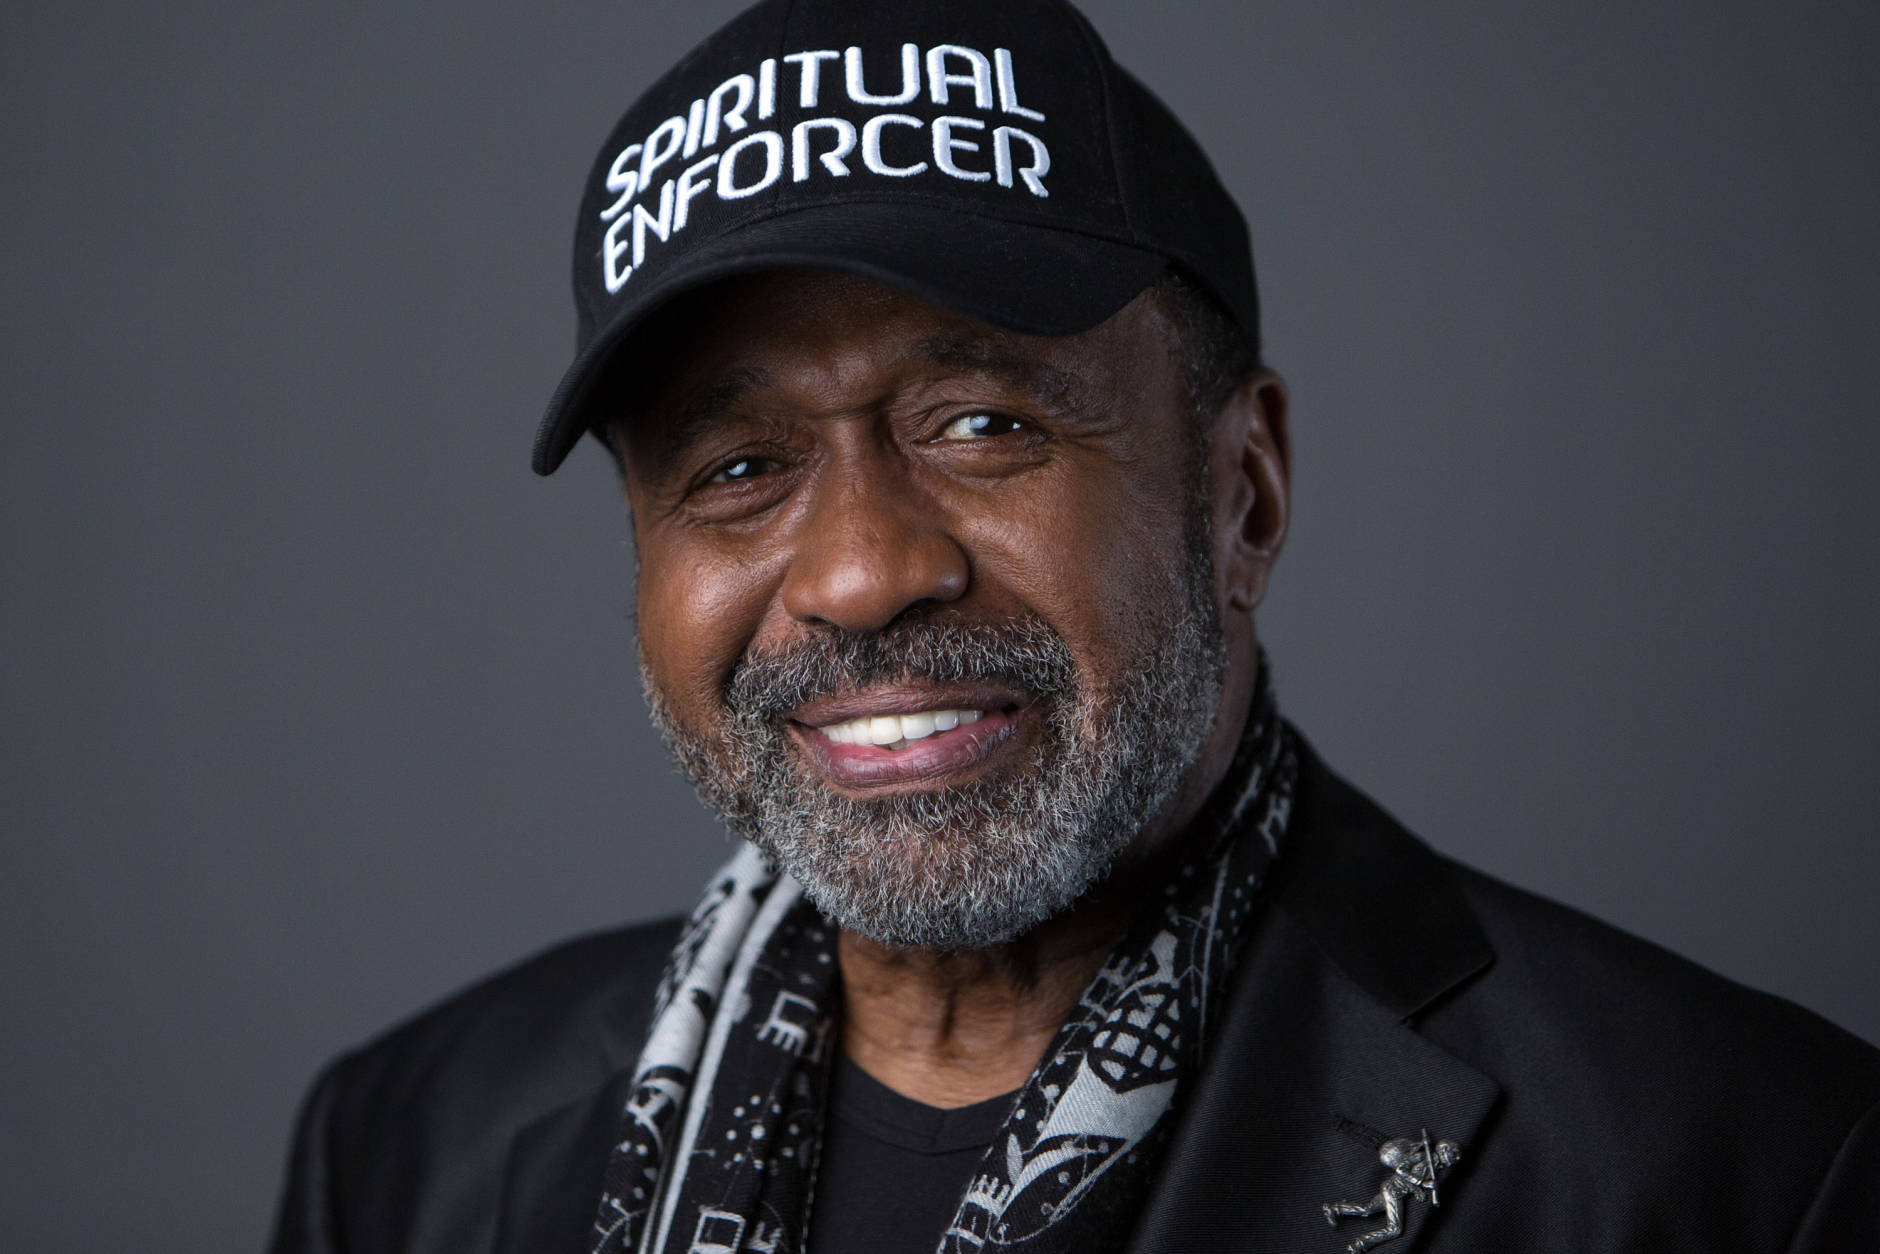 Ben Vereen poses for a portrait in promotion of the upcoming release of "Roots: The Complete Original Series" on Blu-ray on Wednesday, May 11, 2016, in New York. (Photo by Amy Sussman/Invision/AP)